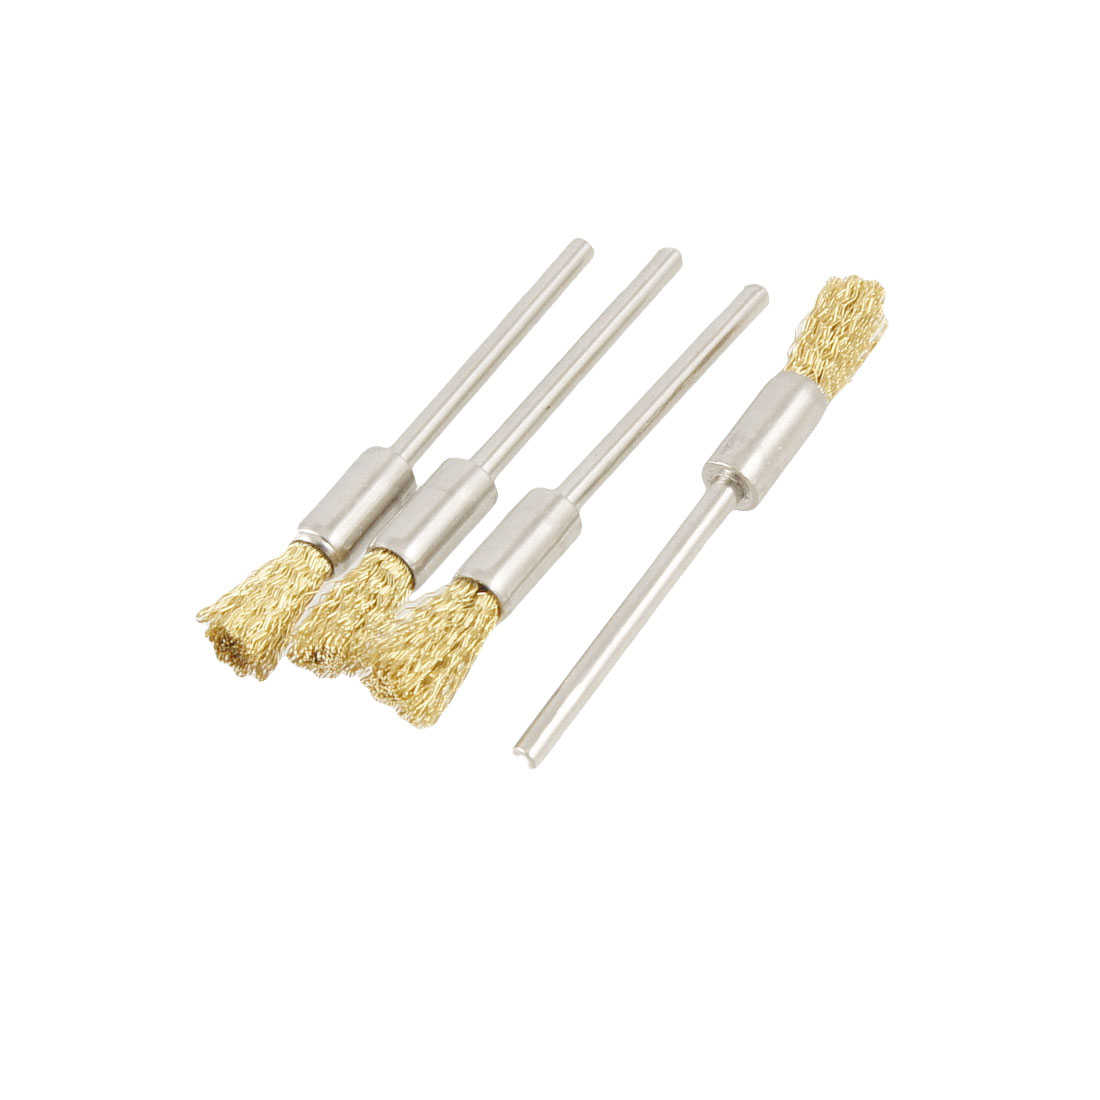 Unique Bargains 2 Pairs Gold Tone 2.4mm Dia Shank Rotary Die Grinder Tool Wire Pencil Brushes